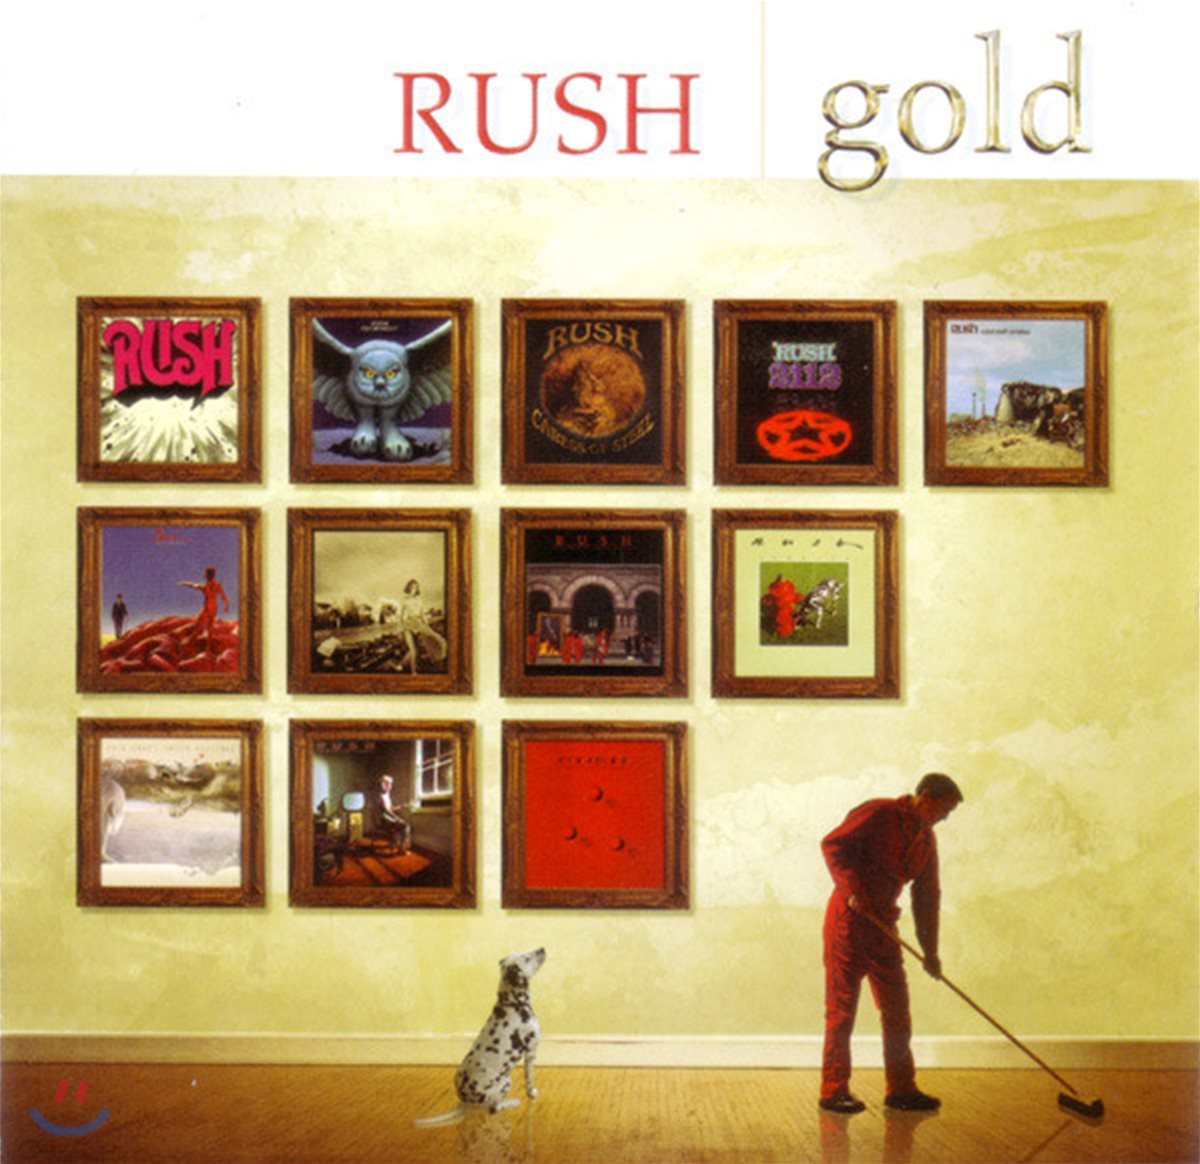 Rush - Gold: Definitive Collection